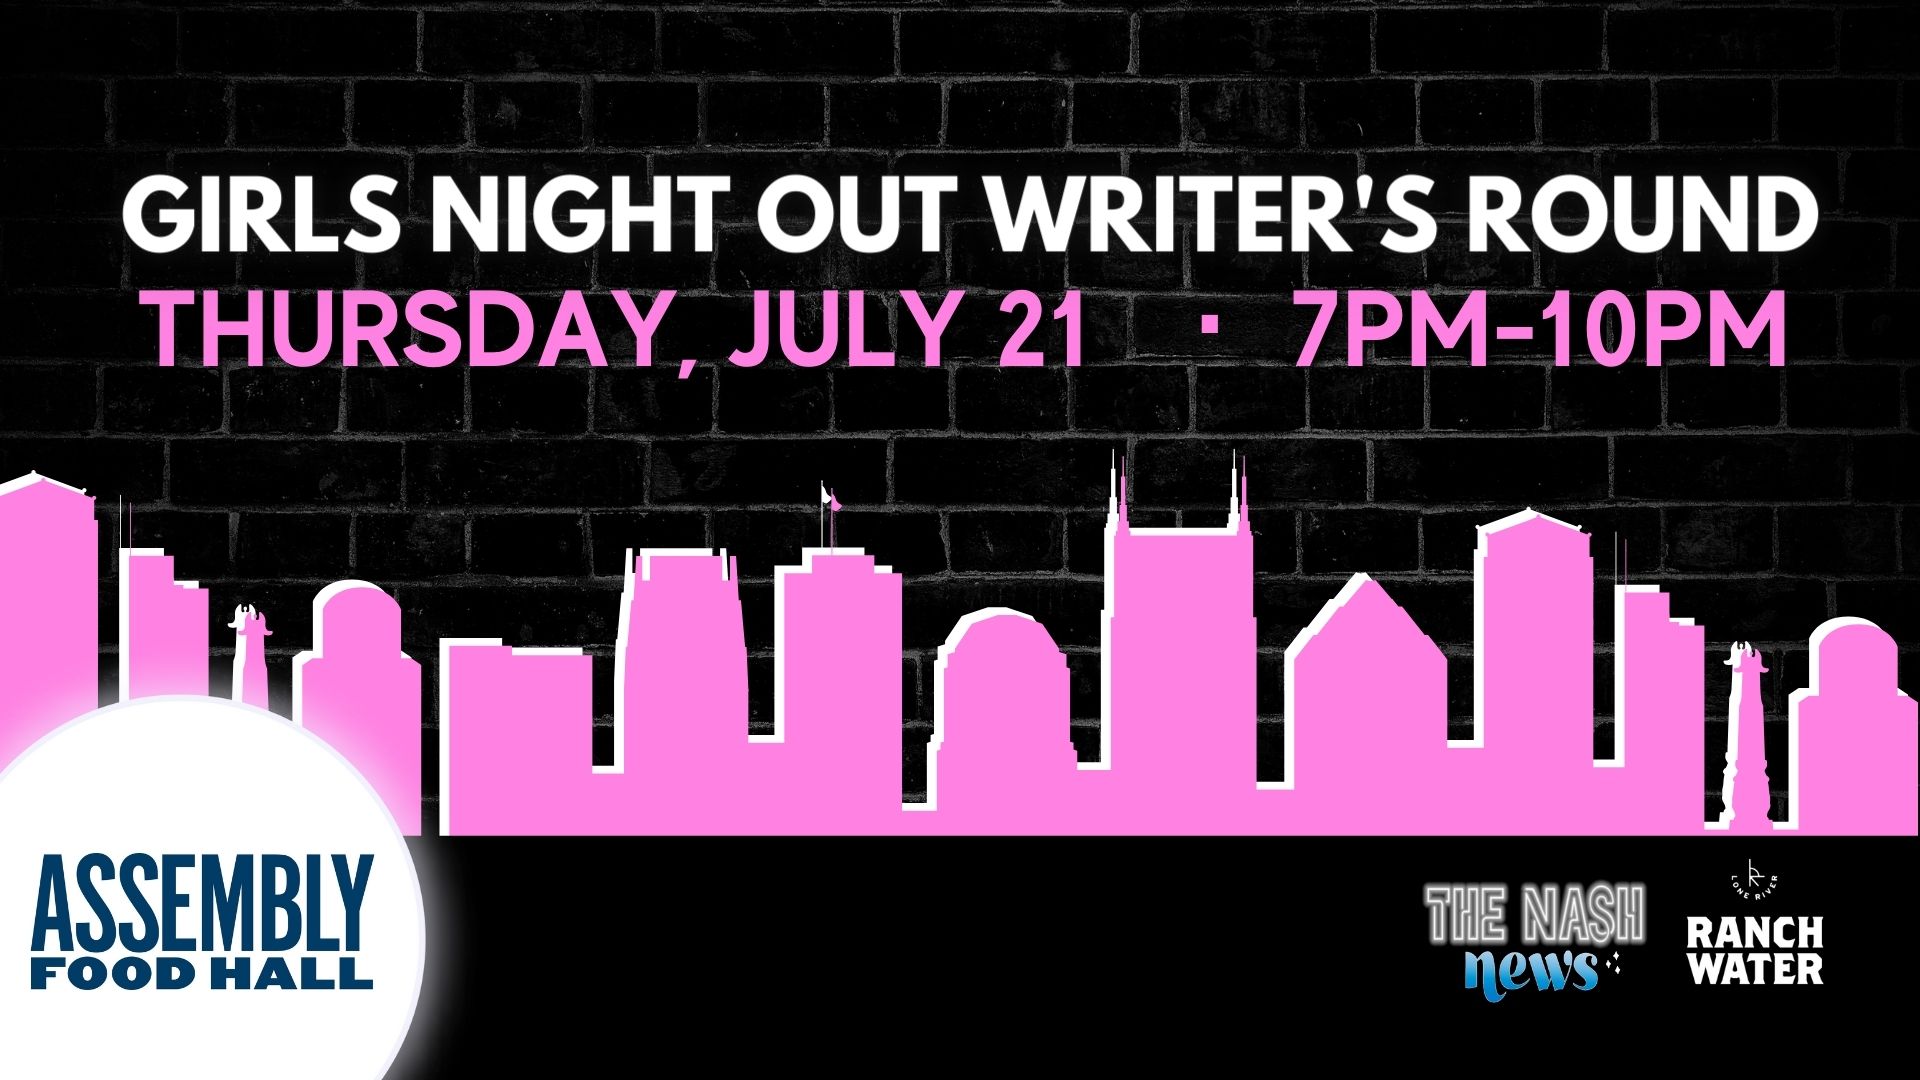 The Nash News Presents Girls Night Out Writer’s Round - hero